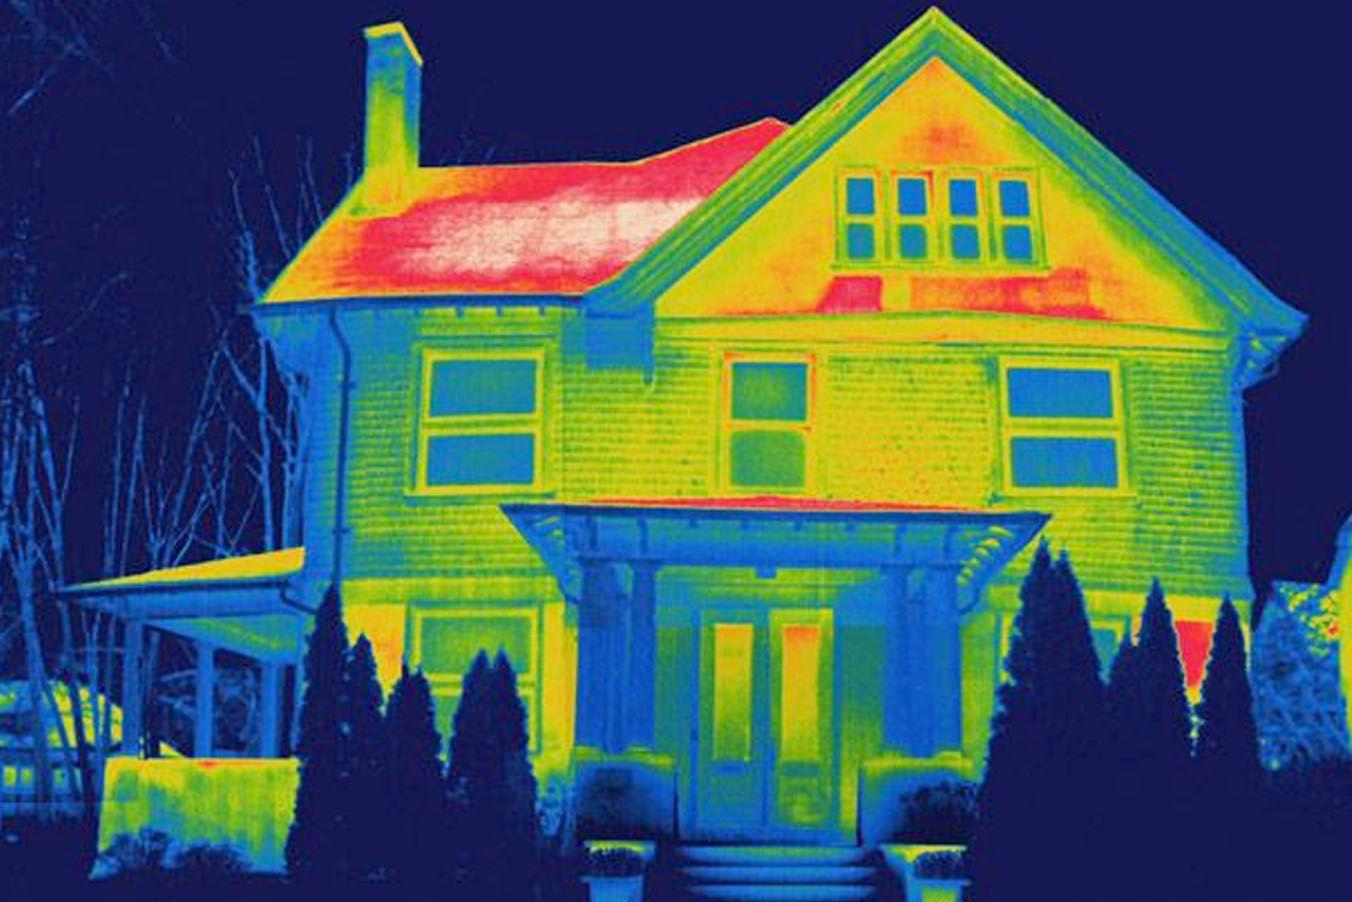 https://www.digitaltrends.com/wp-content/uploads/2014/01/thermal-view-house.jpg?p=1